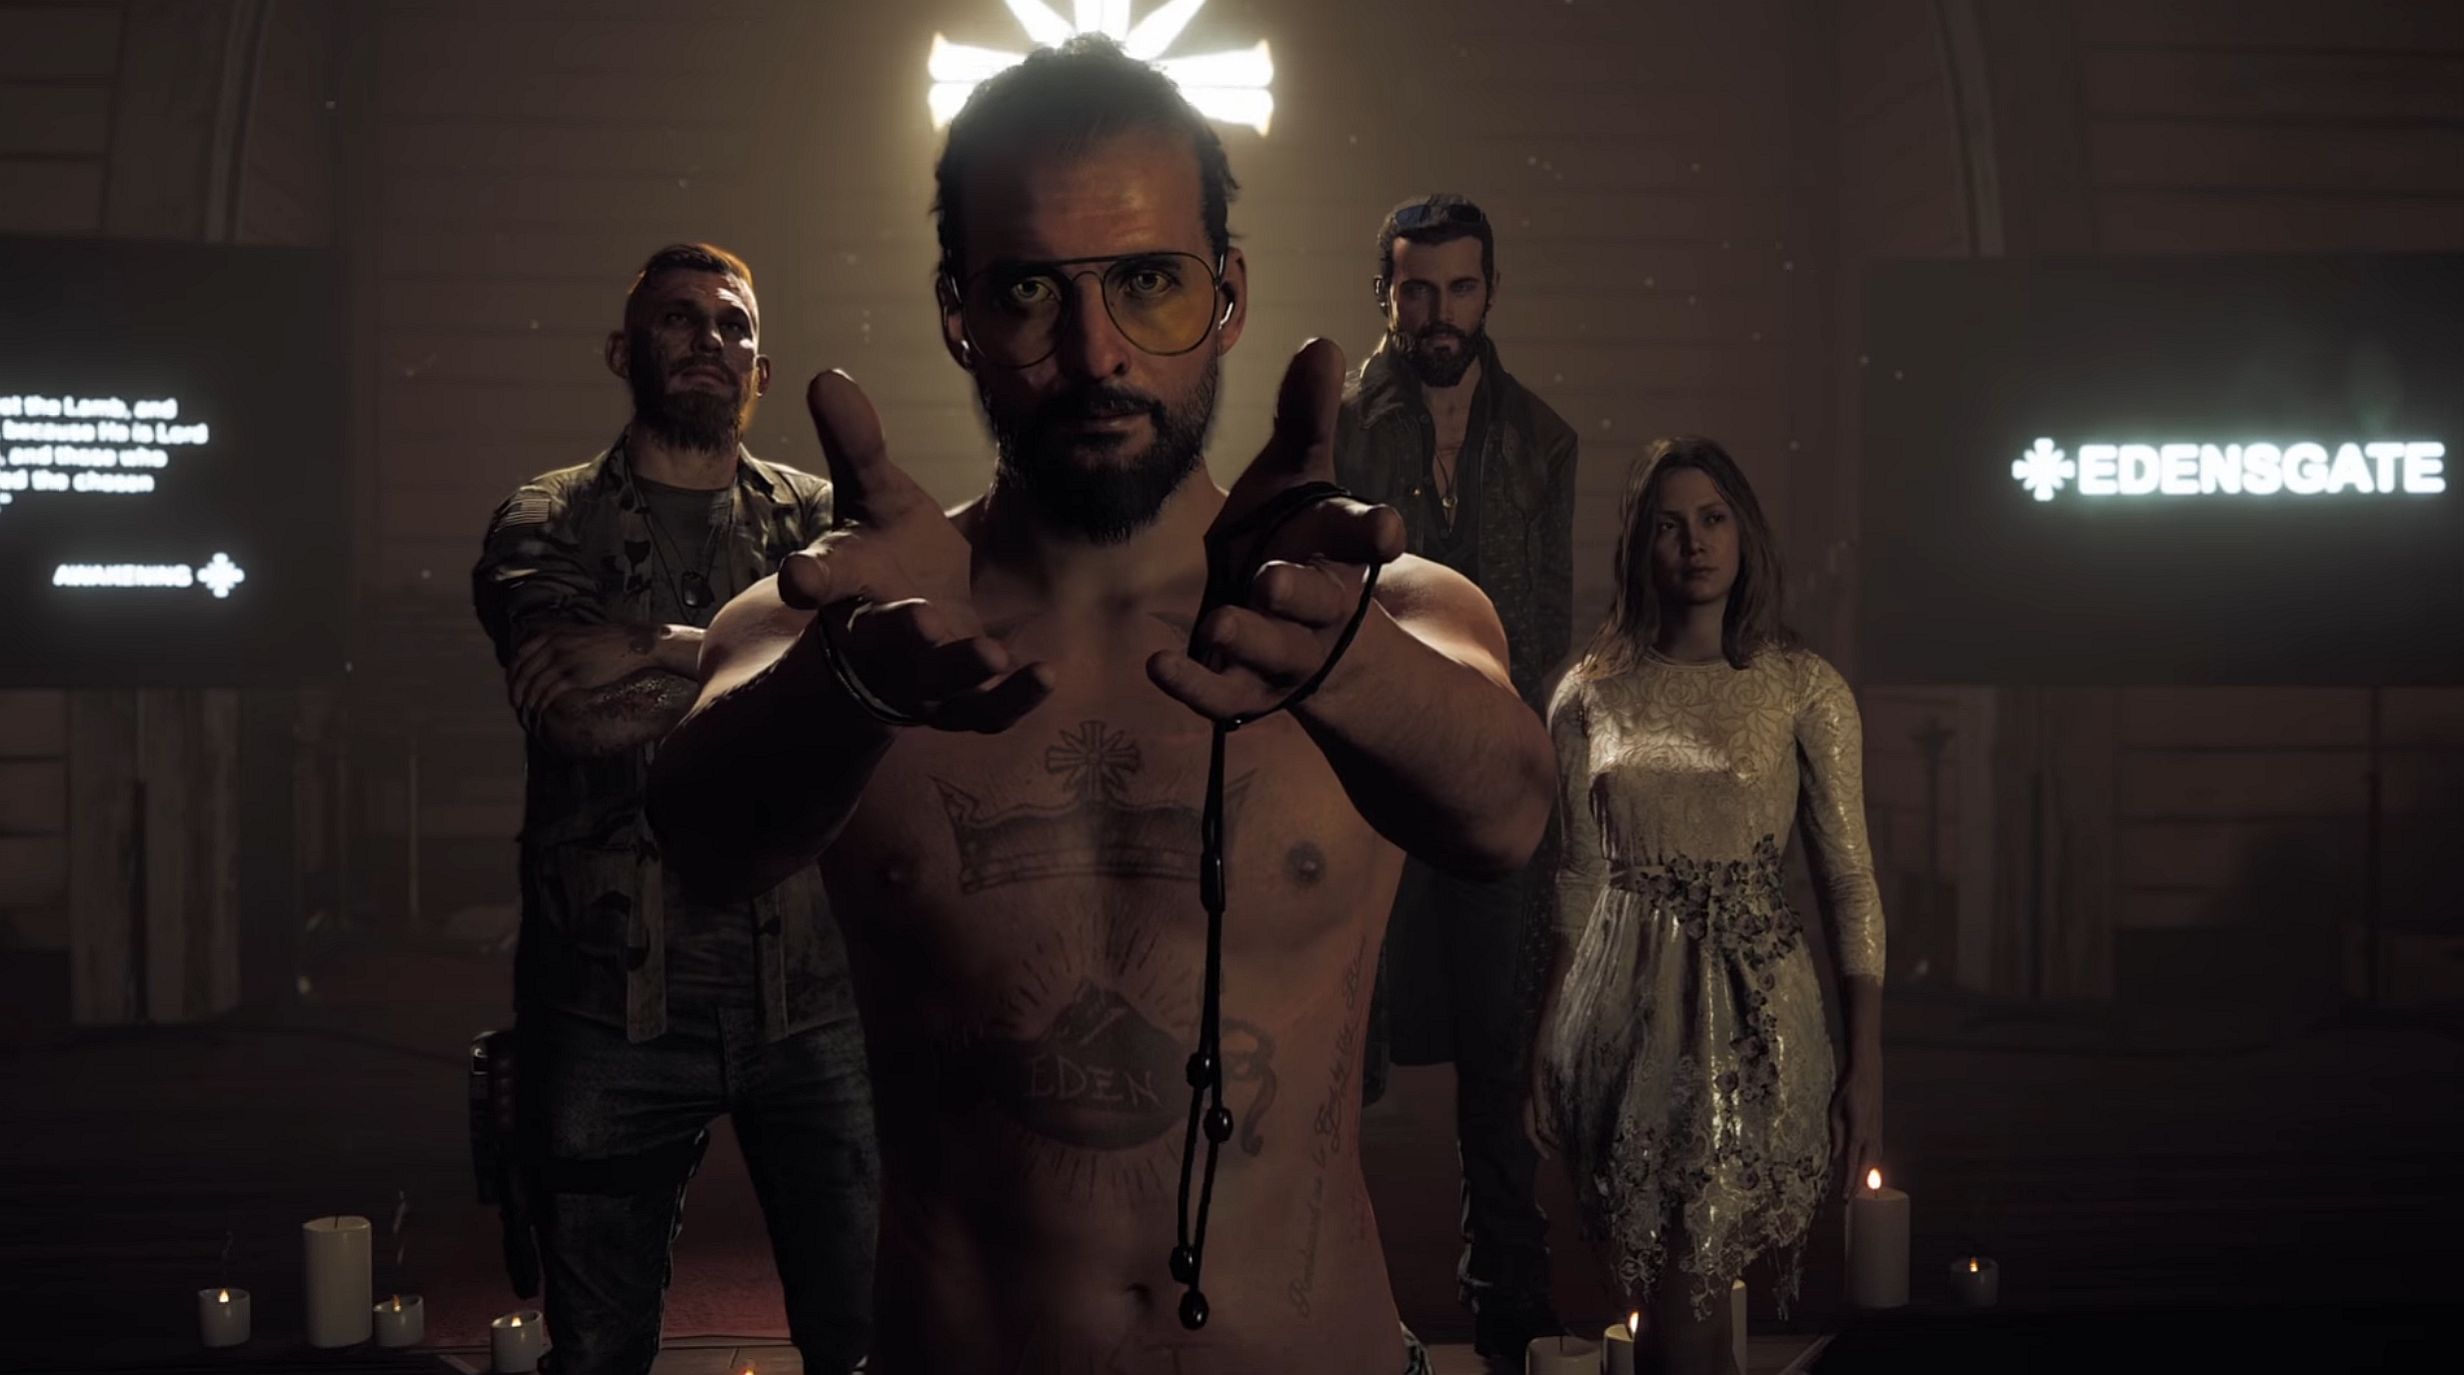 Image for Collapse is Far Cry 6's final main DLC and in it you play as Far Cry 5 villain Joseph Seed